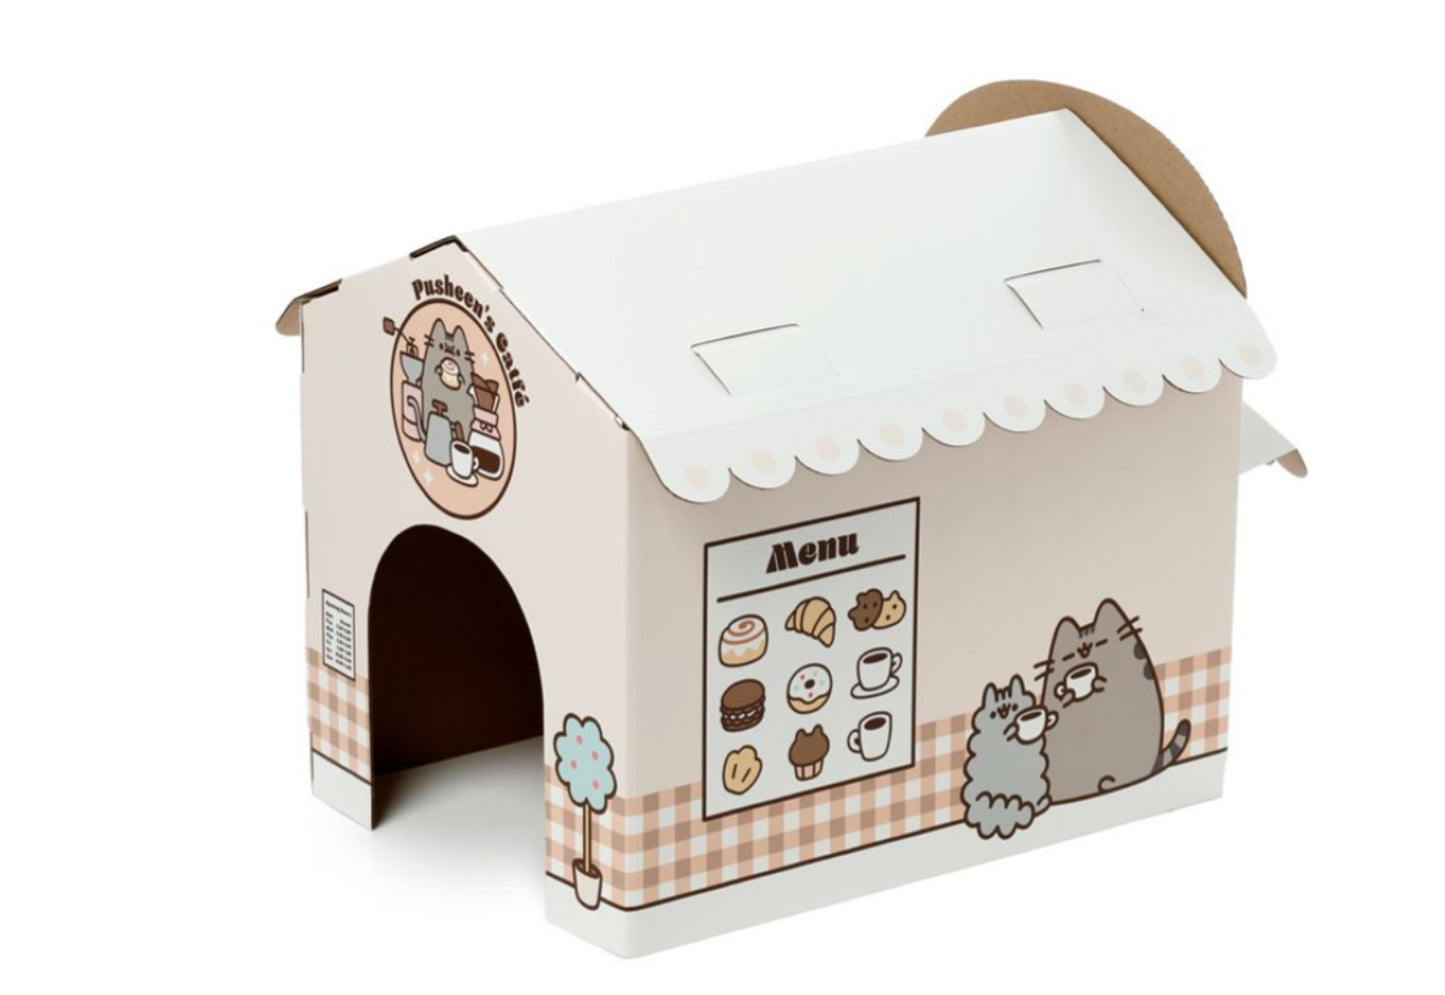 Pusheen Cat Play House Cat Cafe Catfe - Build it Yourself